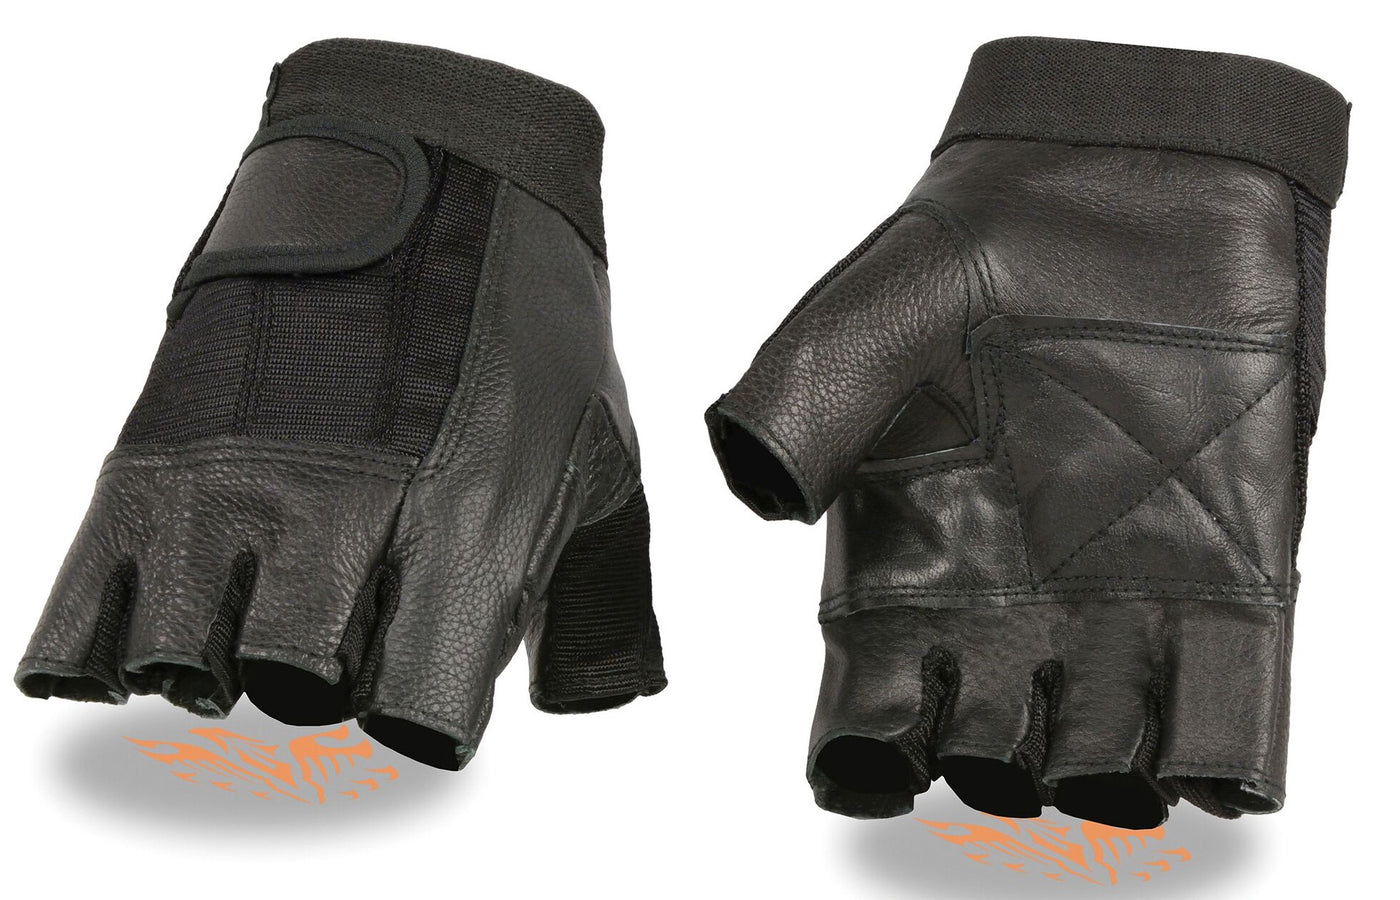 Black Leather and Mesh Fingerless Driving or Motorcycle Riding Gloves have velcro wrist closure and are available in sizes XS-3X in our shop just outside Nashville in Smyrna, TN.